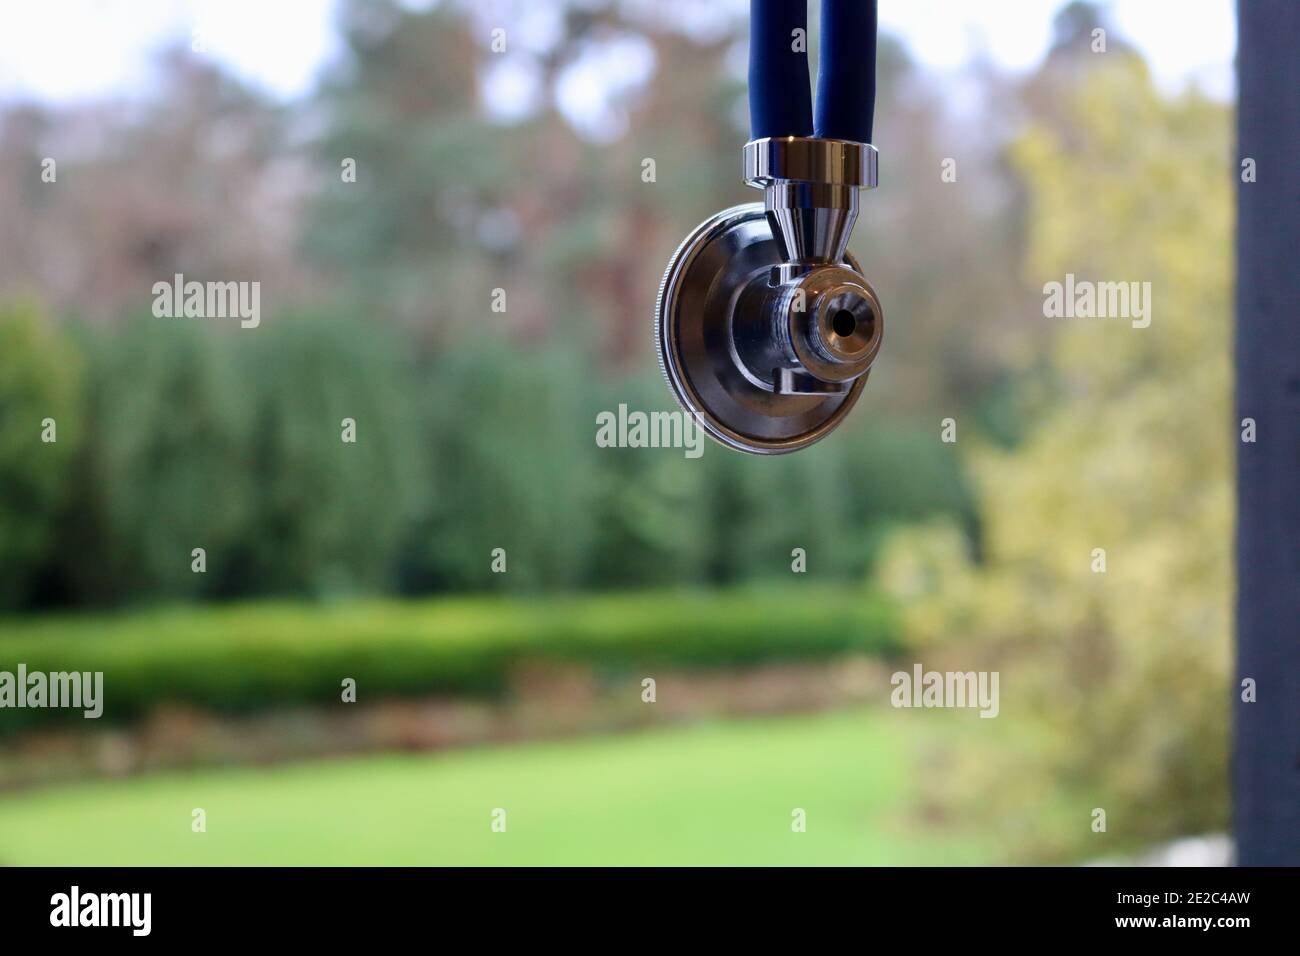 Stethoscope hanging in window space with blurred garden in background Stock Photo